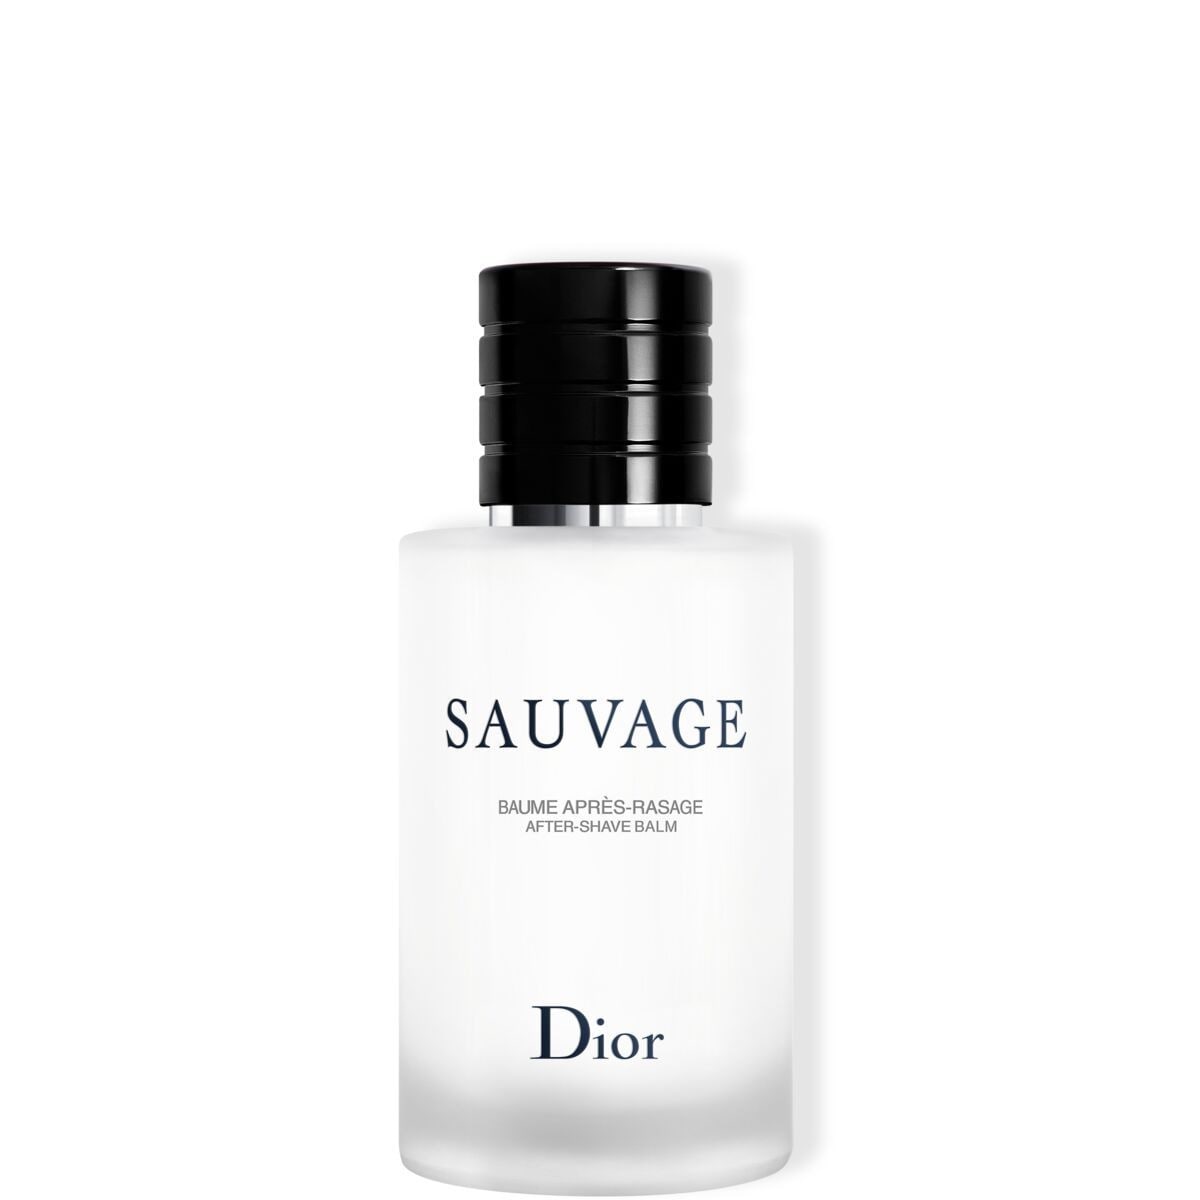 Dior Sauvage After-Shave Balsam